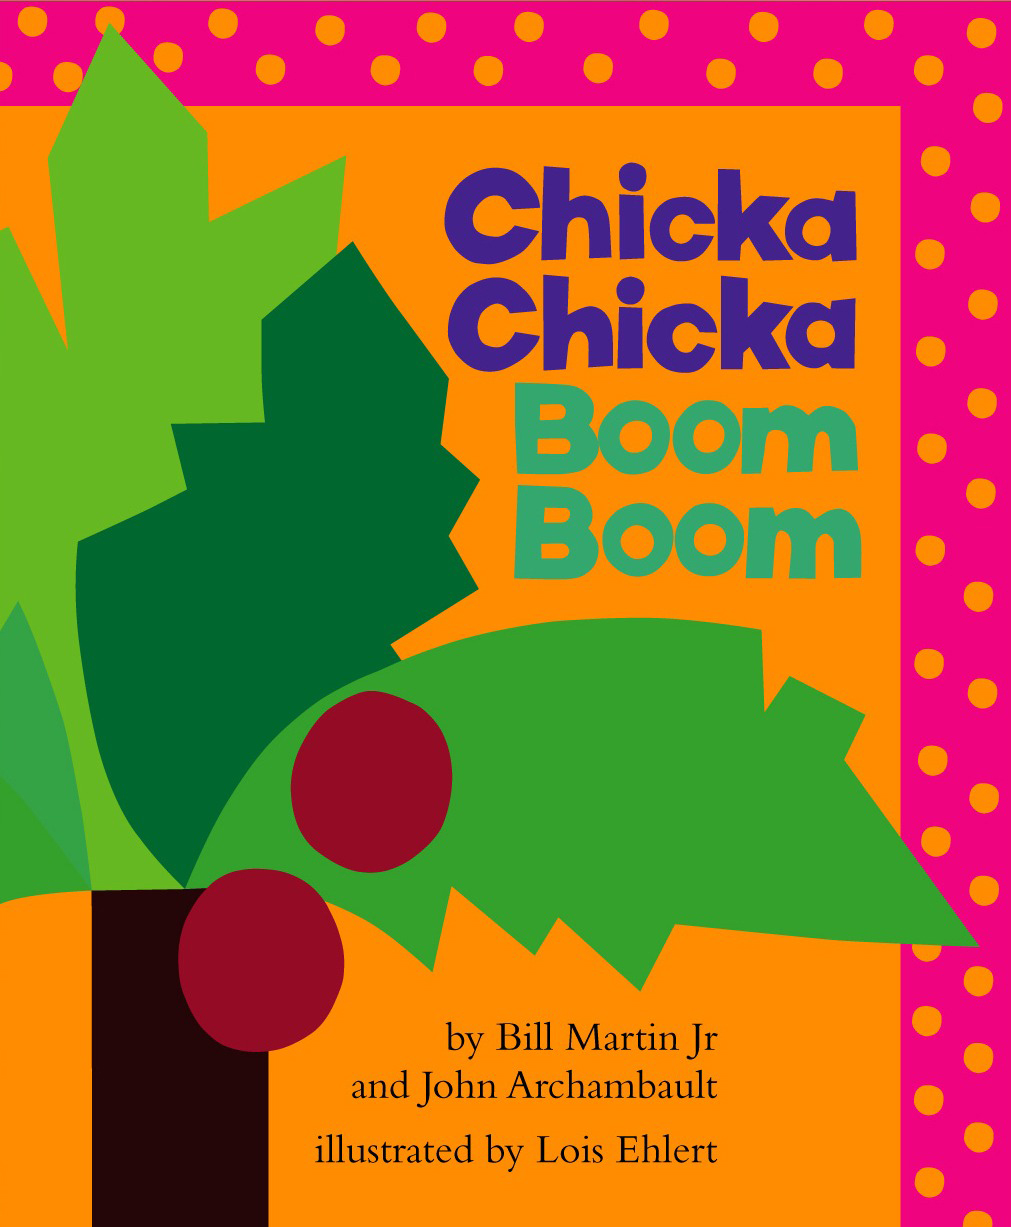 Book cover for "Chicka Chicka Boom Boom" depicting a tree